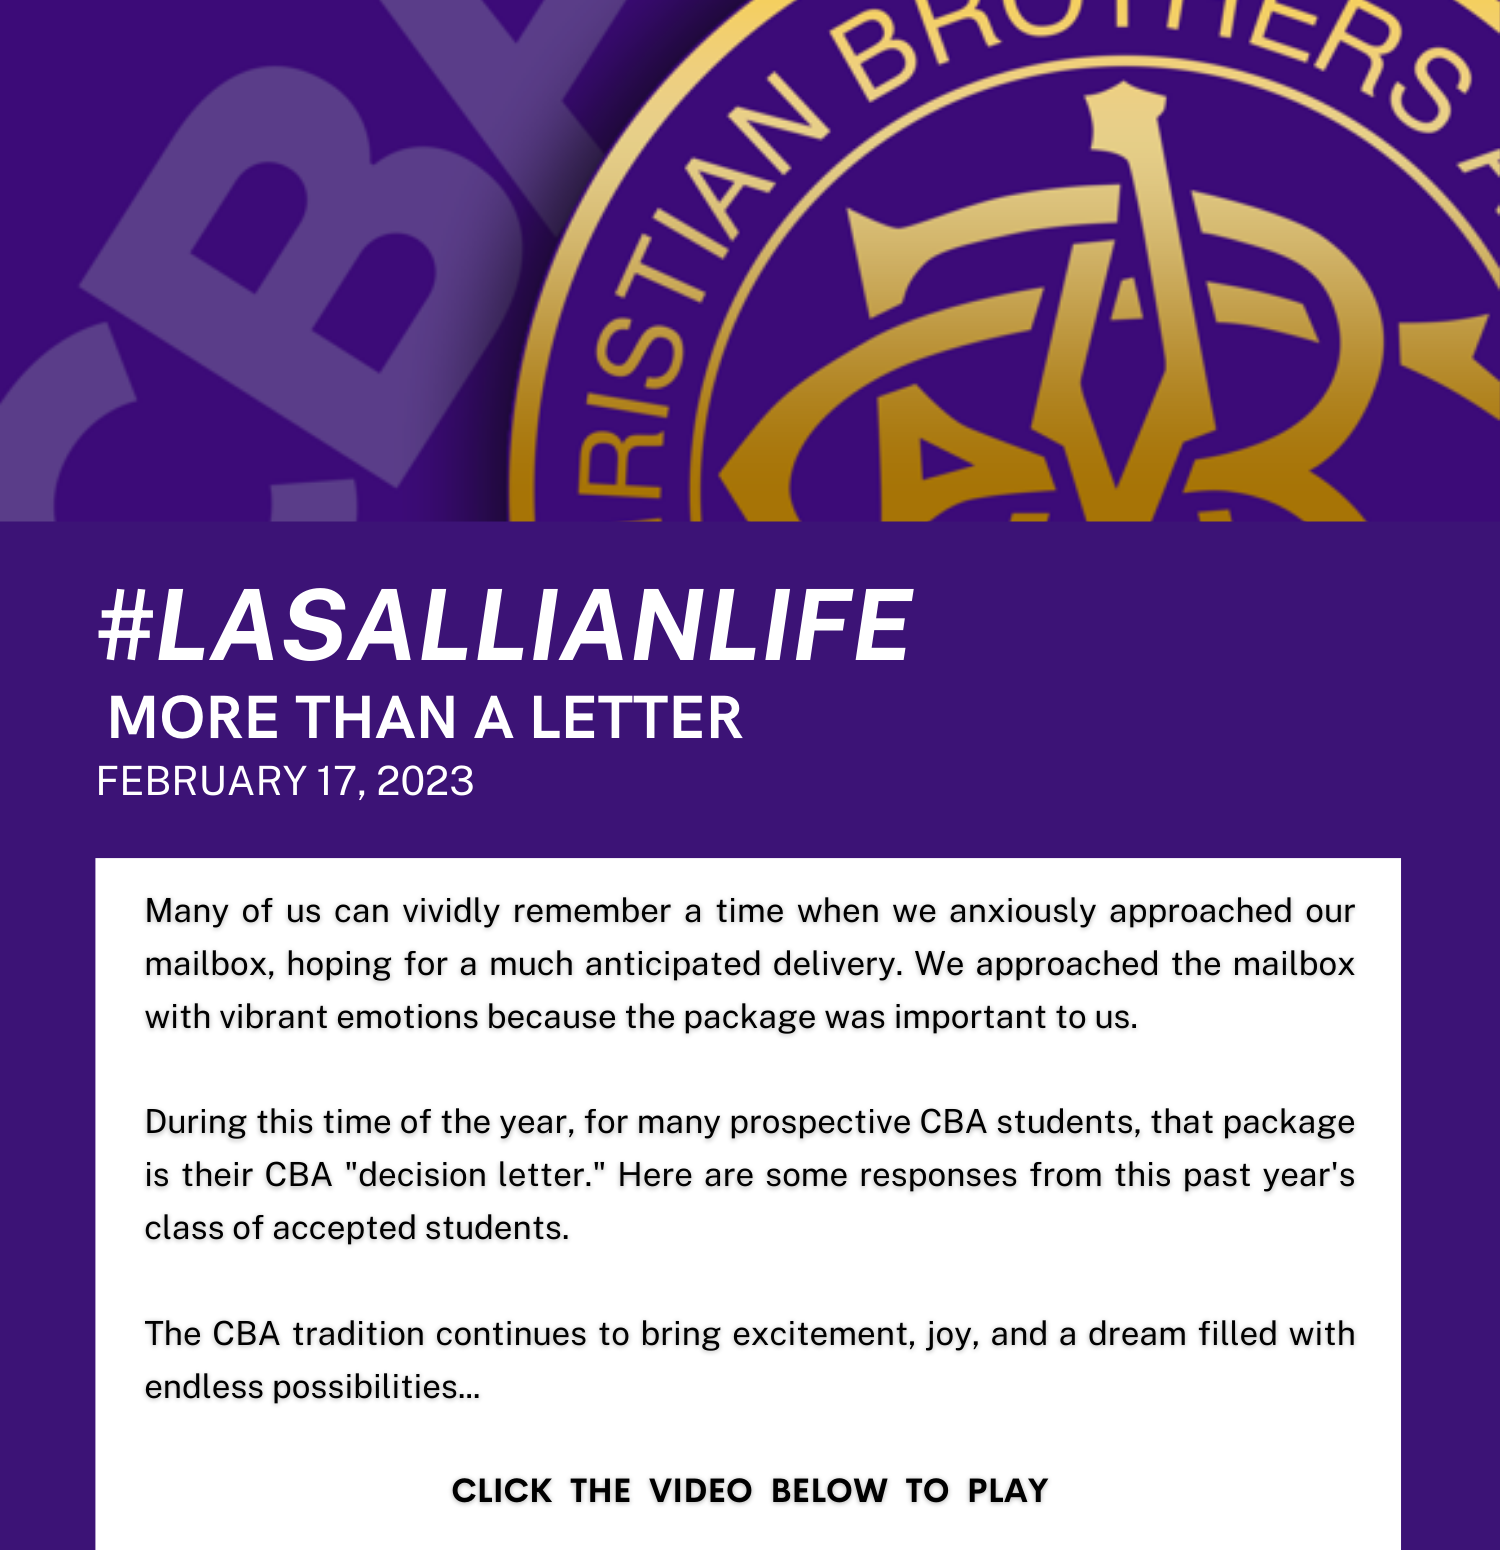 #LasallianLife - More Than a Letter - Christian Brothers Academy - February 17, 2023